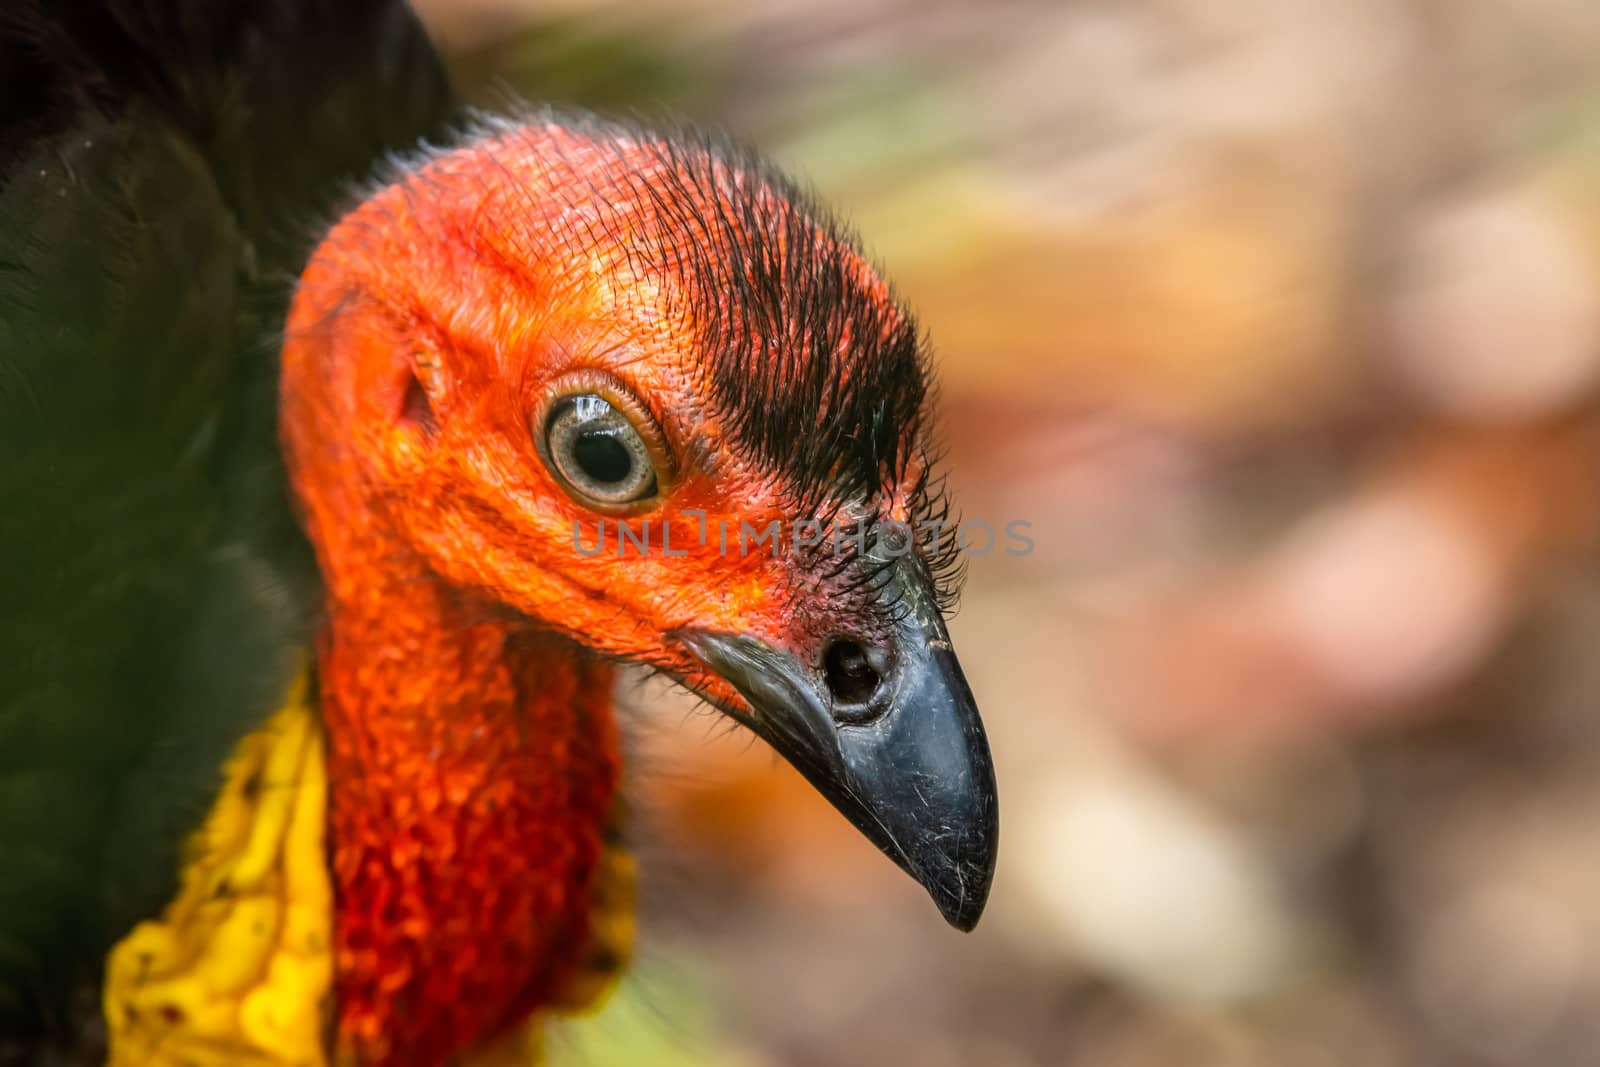 Close up of a red headed Australian Brush Turkey - Alectura lathami - Queensland